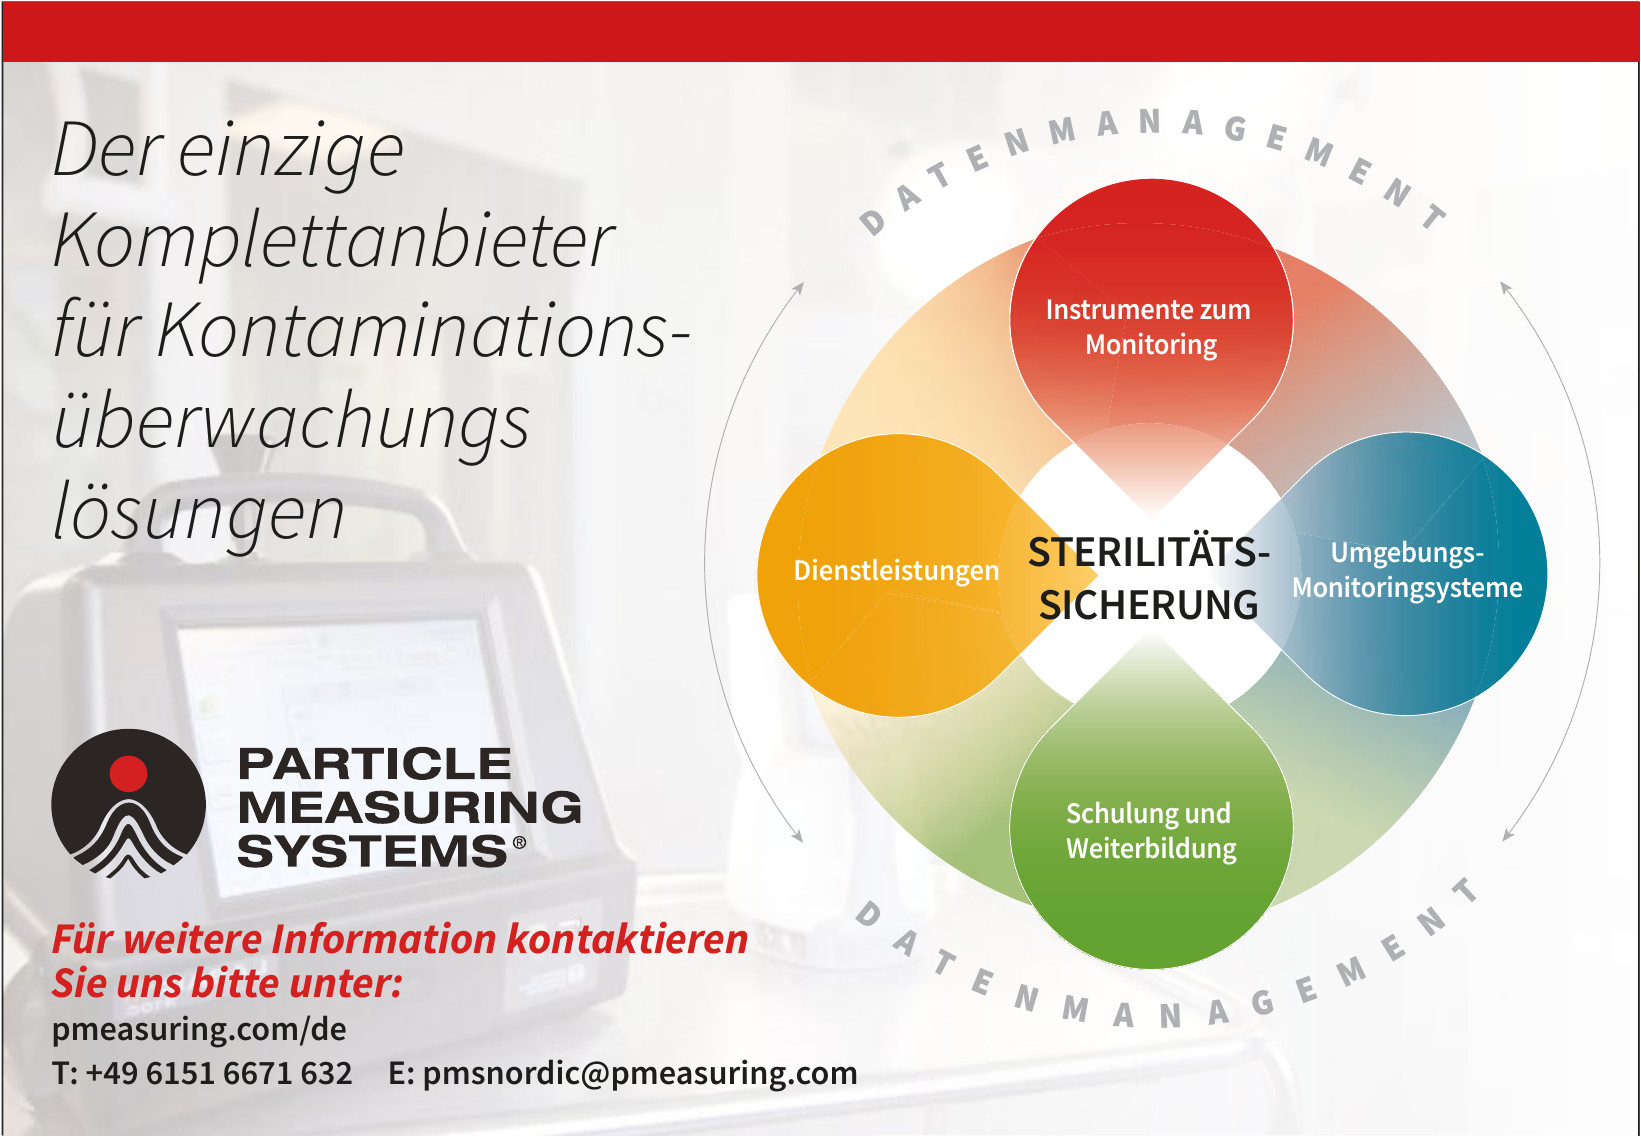 Particle Measuring Systems Germany GmbH